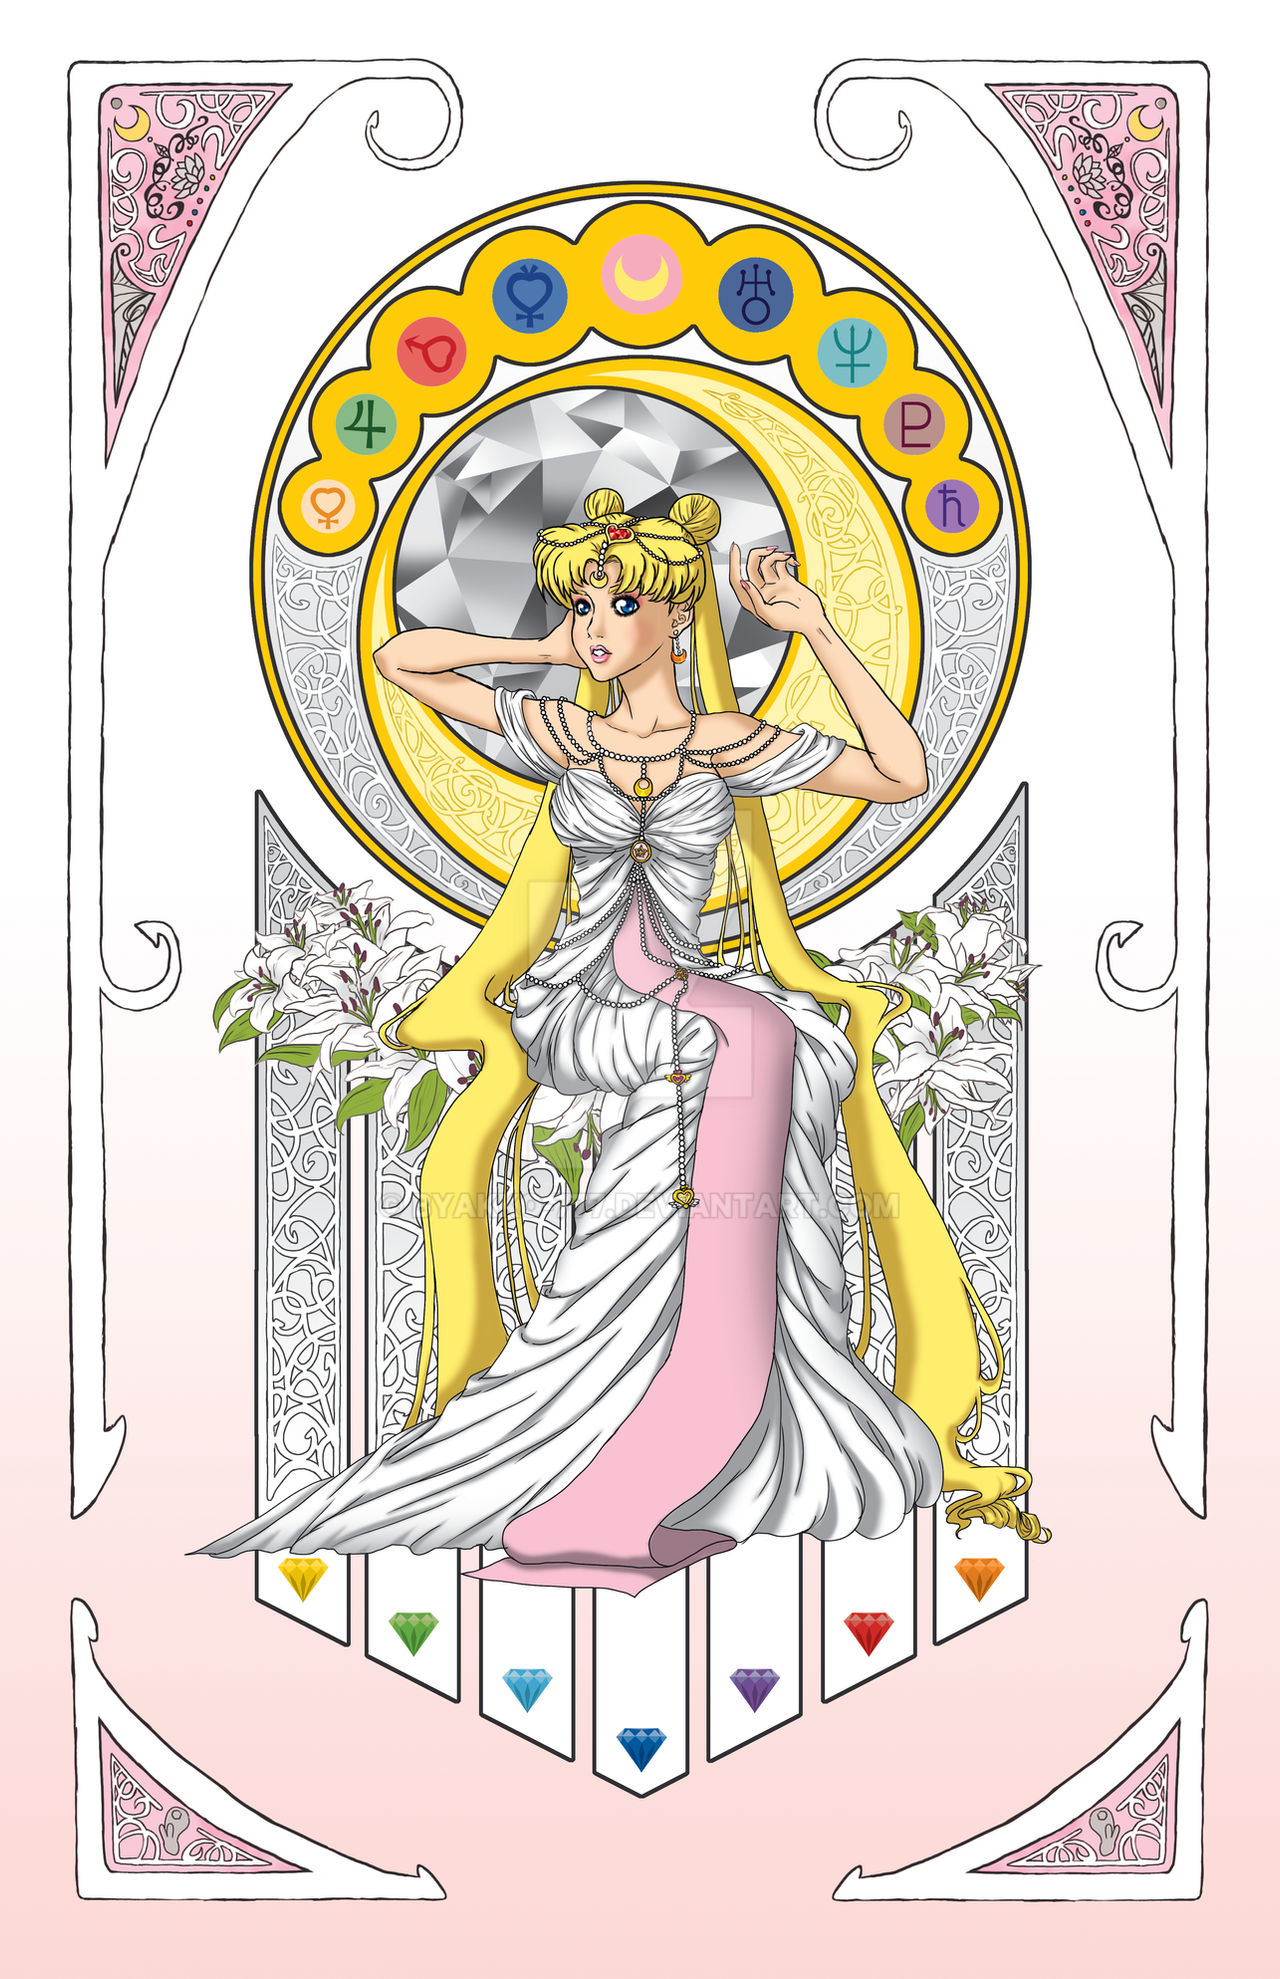 Sailor moon as sailor cosmos with long white hair, a white dress, and a  huge majestic staff, high quality